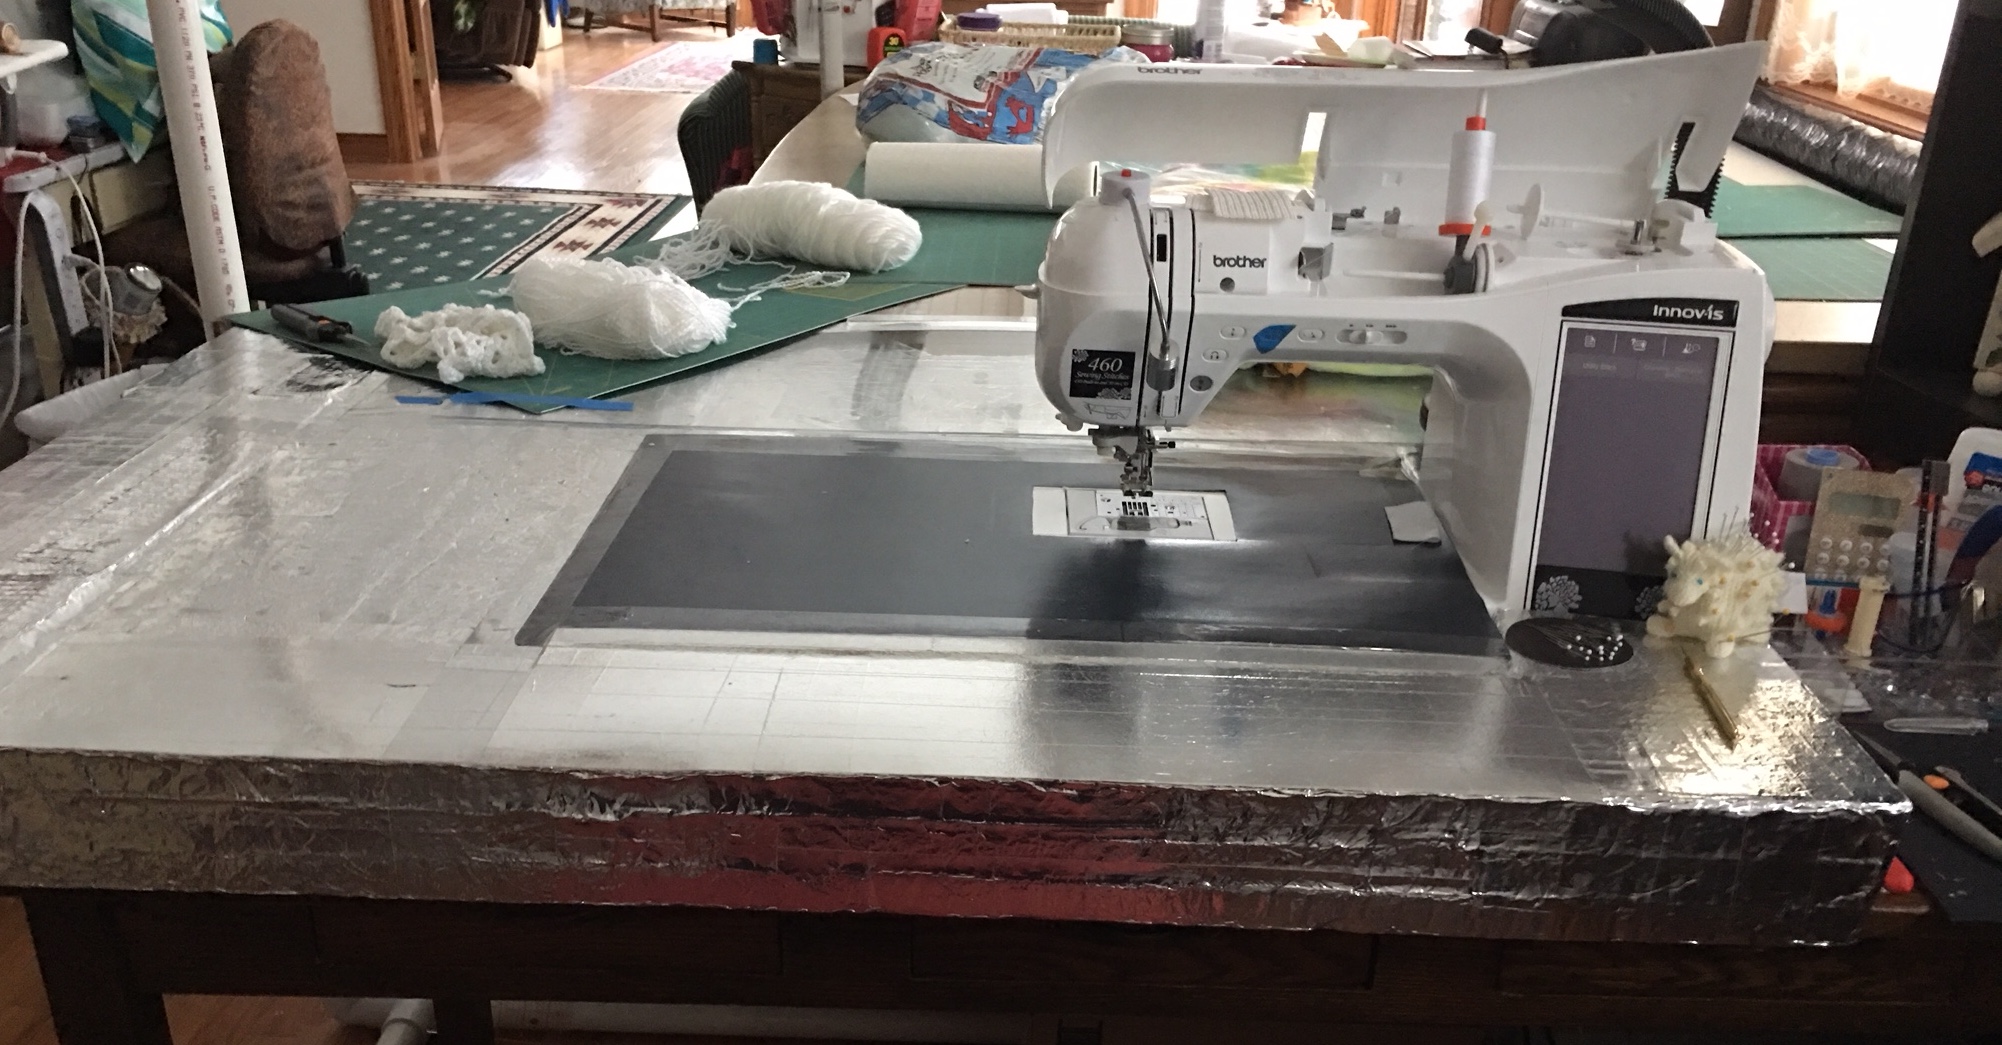 Laura Ashley/Brother Innov-IS NX2000 Machine - Quiltingboard Forums